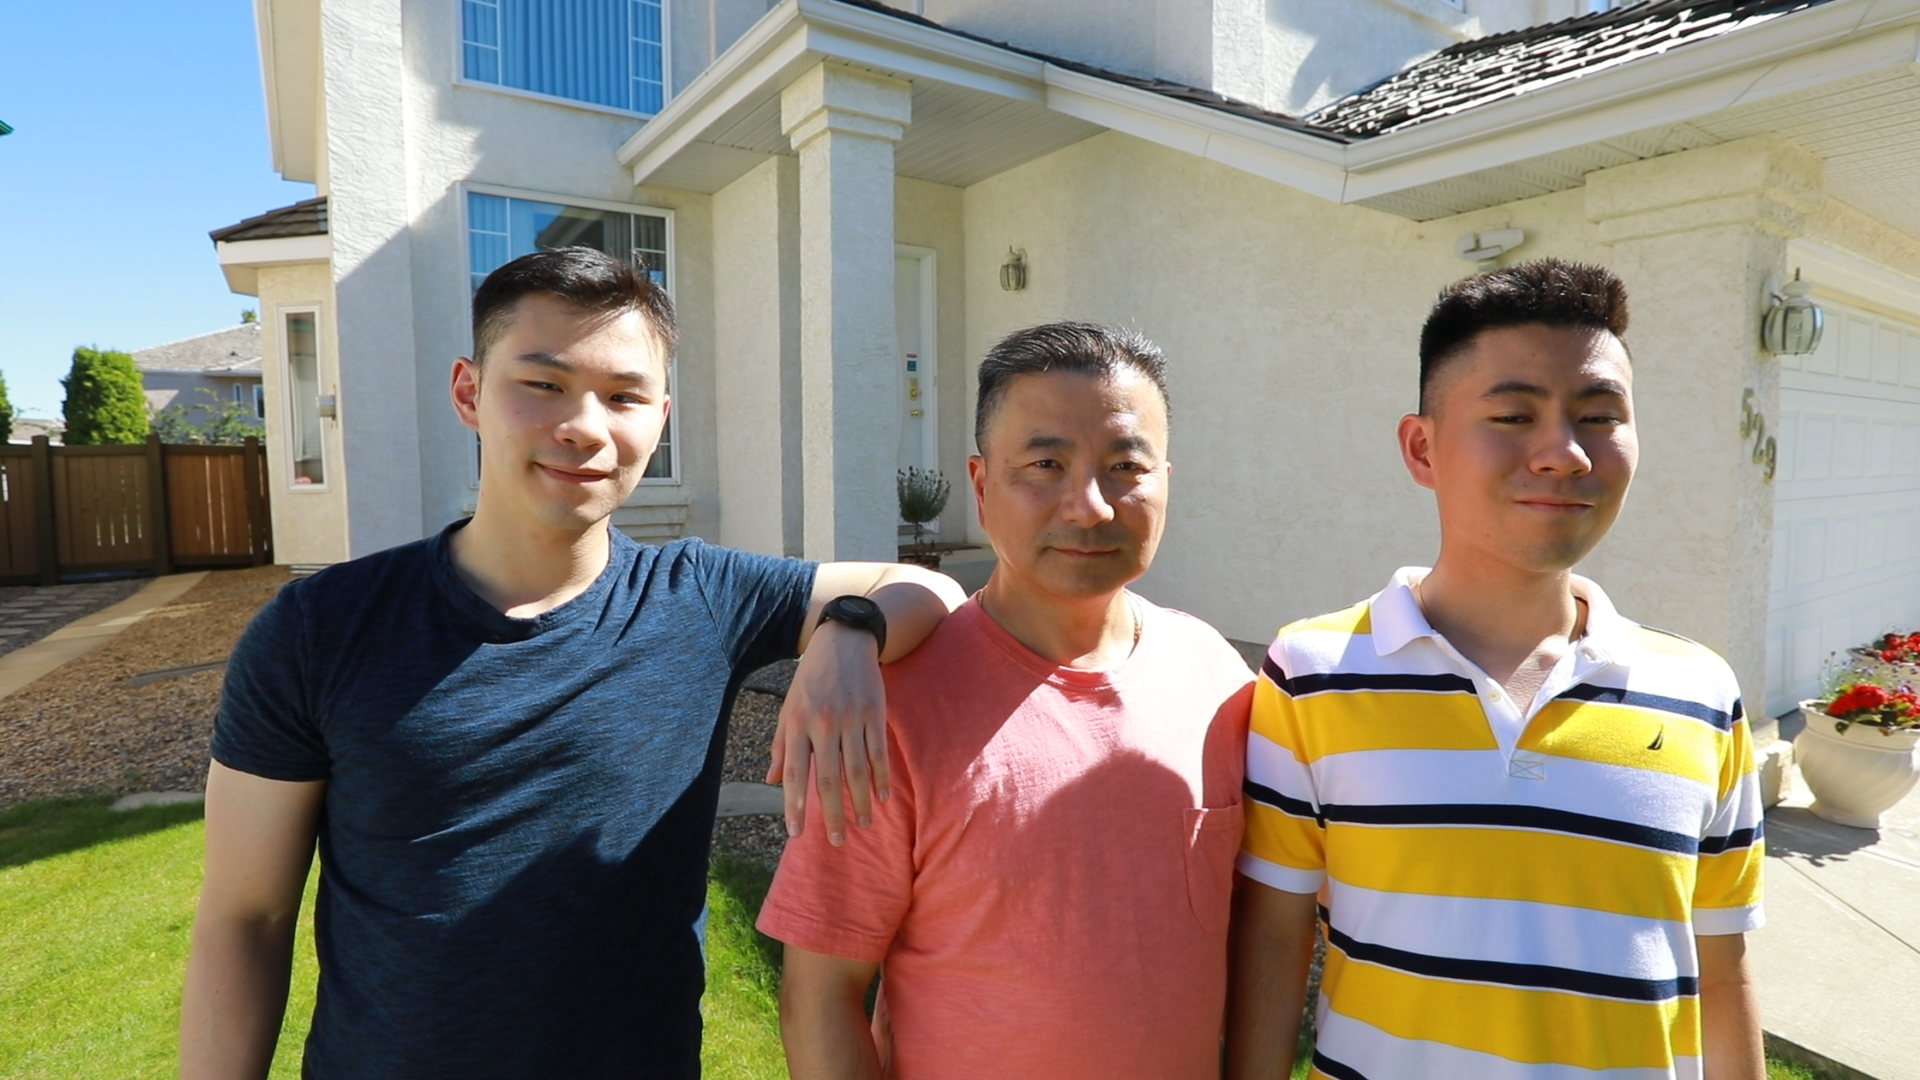 Three men, a father in between his two sons, stand outside in front of a house. 